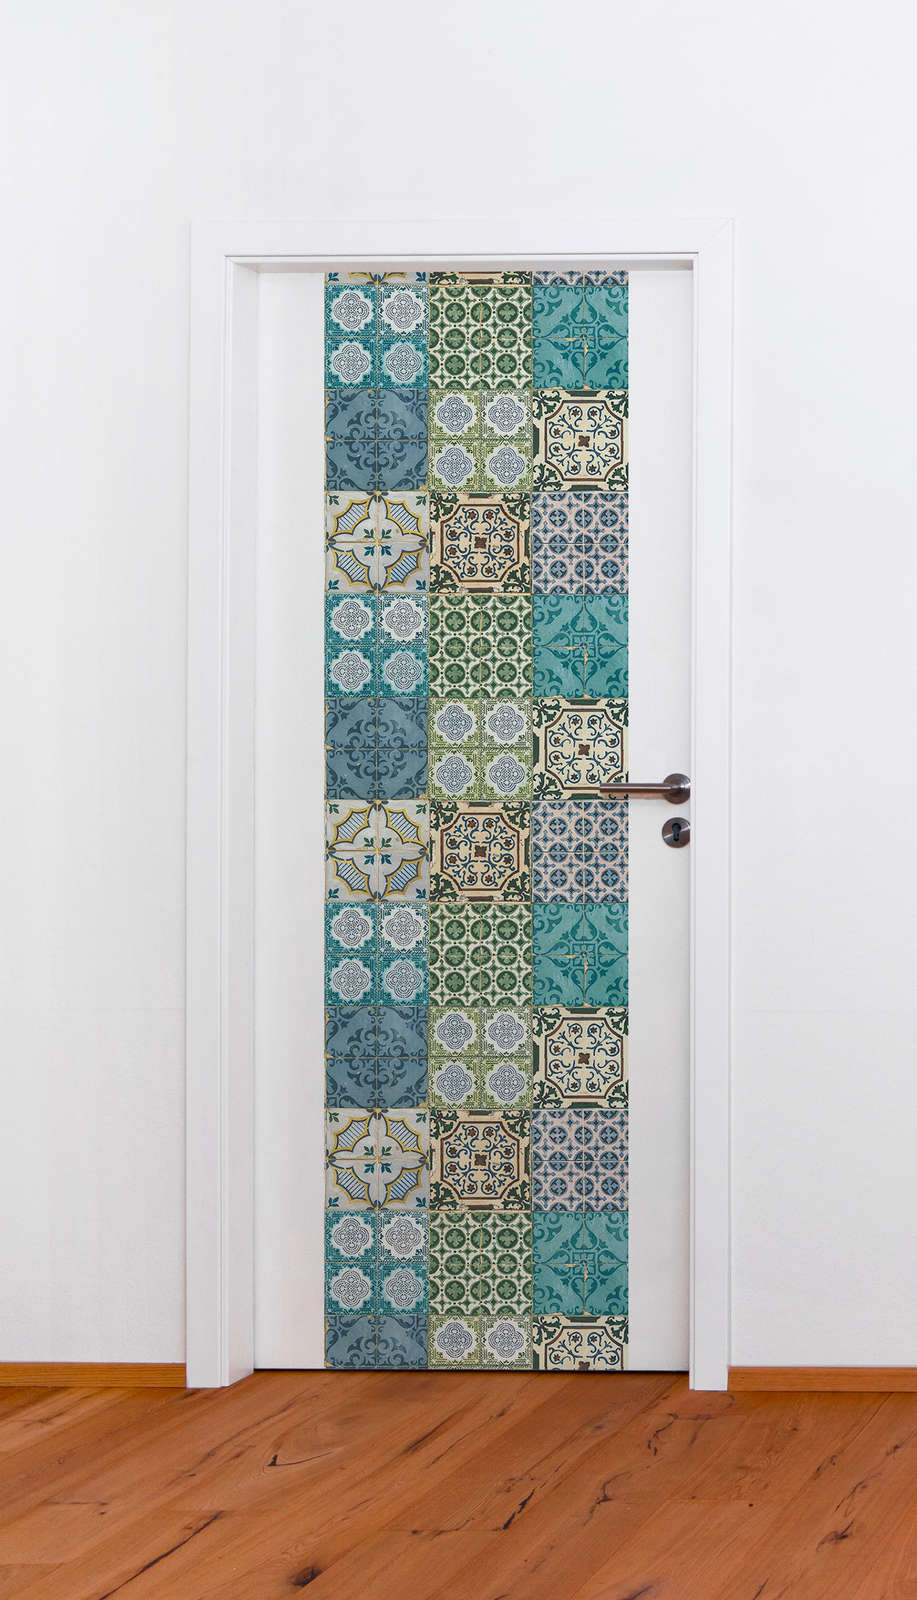             Mosaic wallpaper with tile look in vintage look - colourful
        